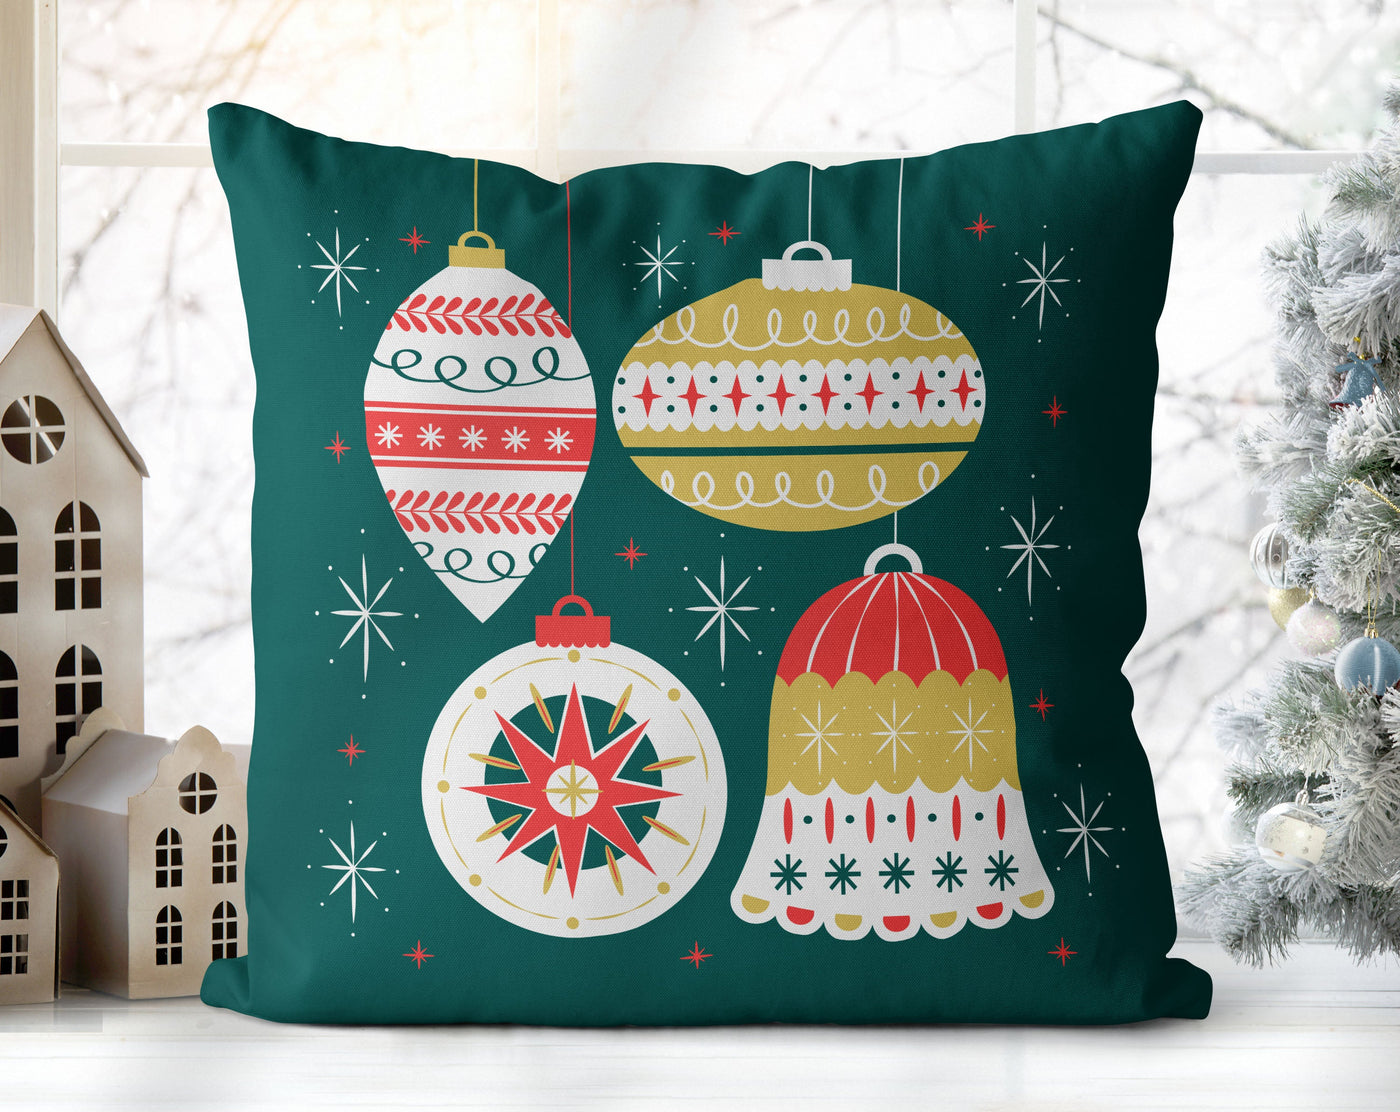 Classical Ornaments Christmas Green and Red Pillow Throw - Cush Potato Pillows